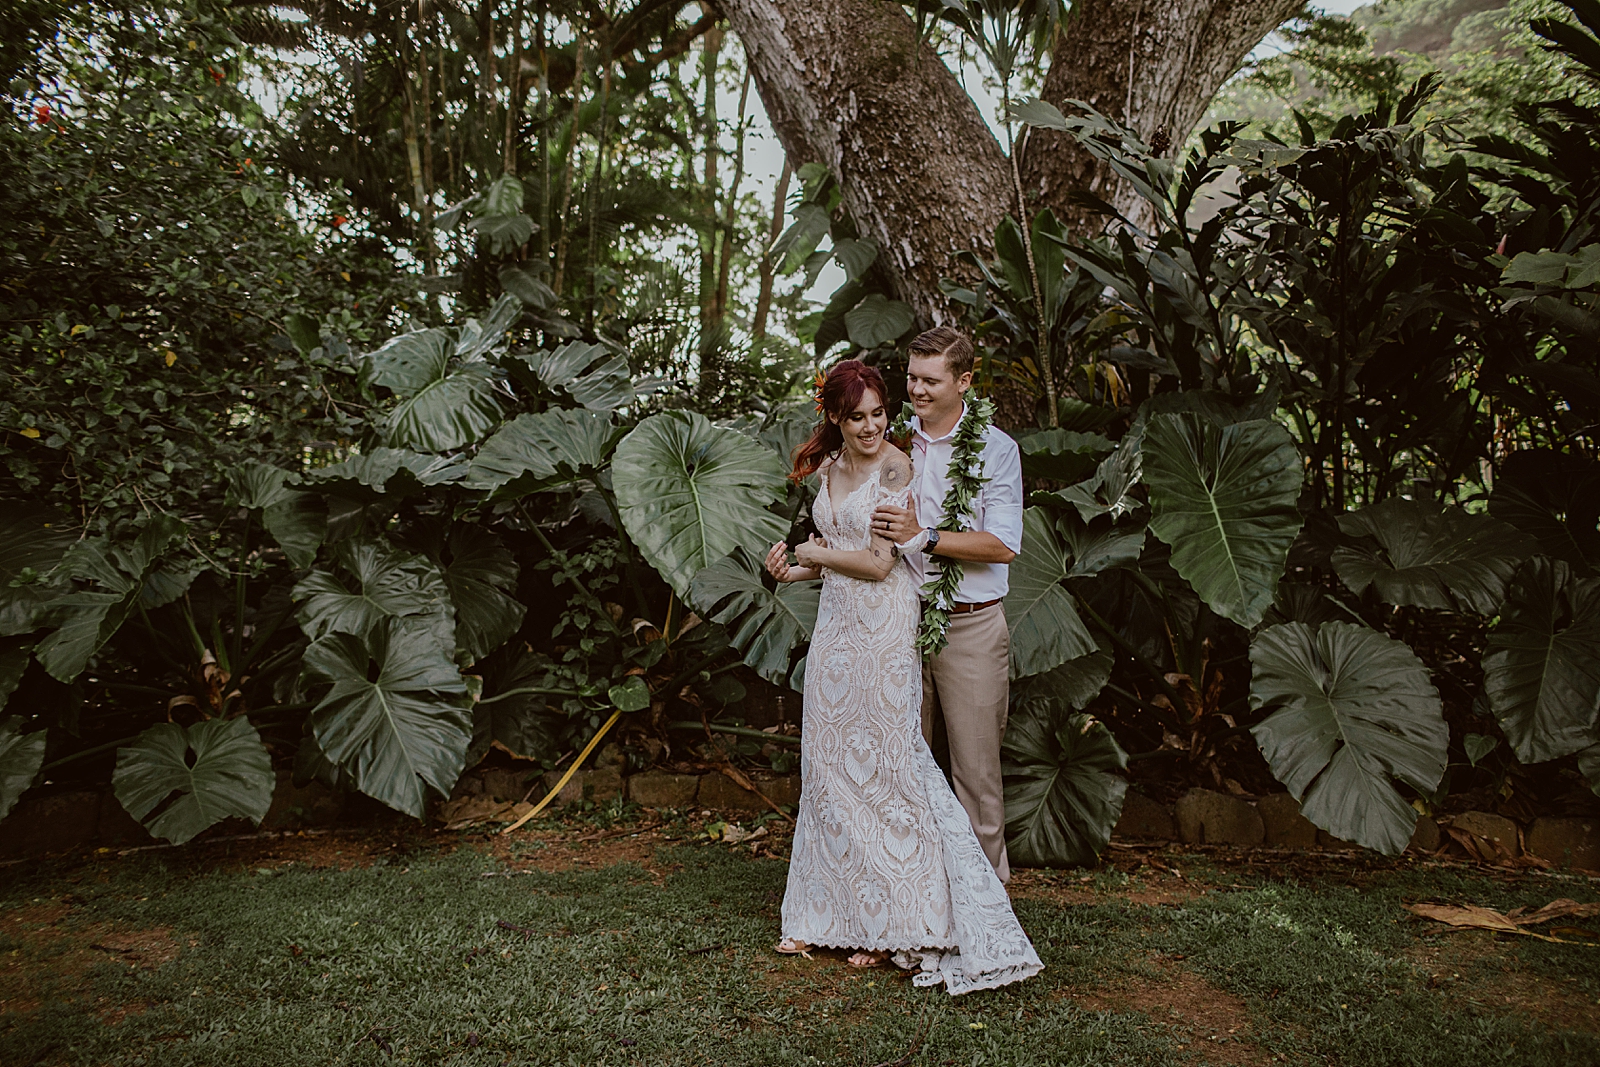 Groom holding Bride in front of tropical green plants